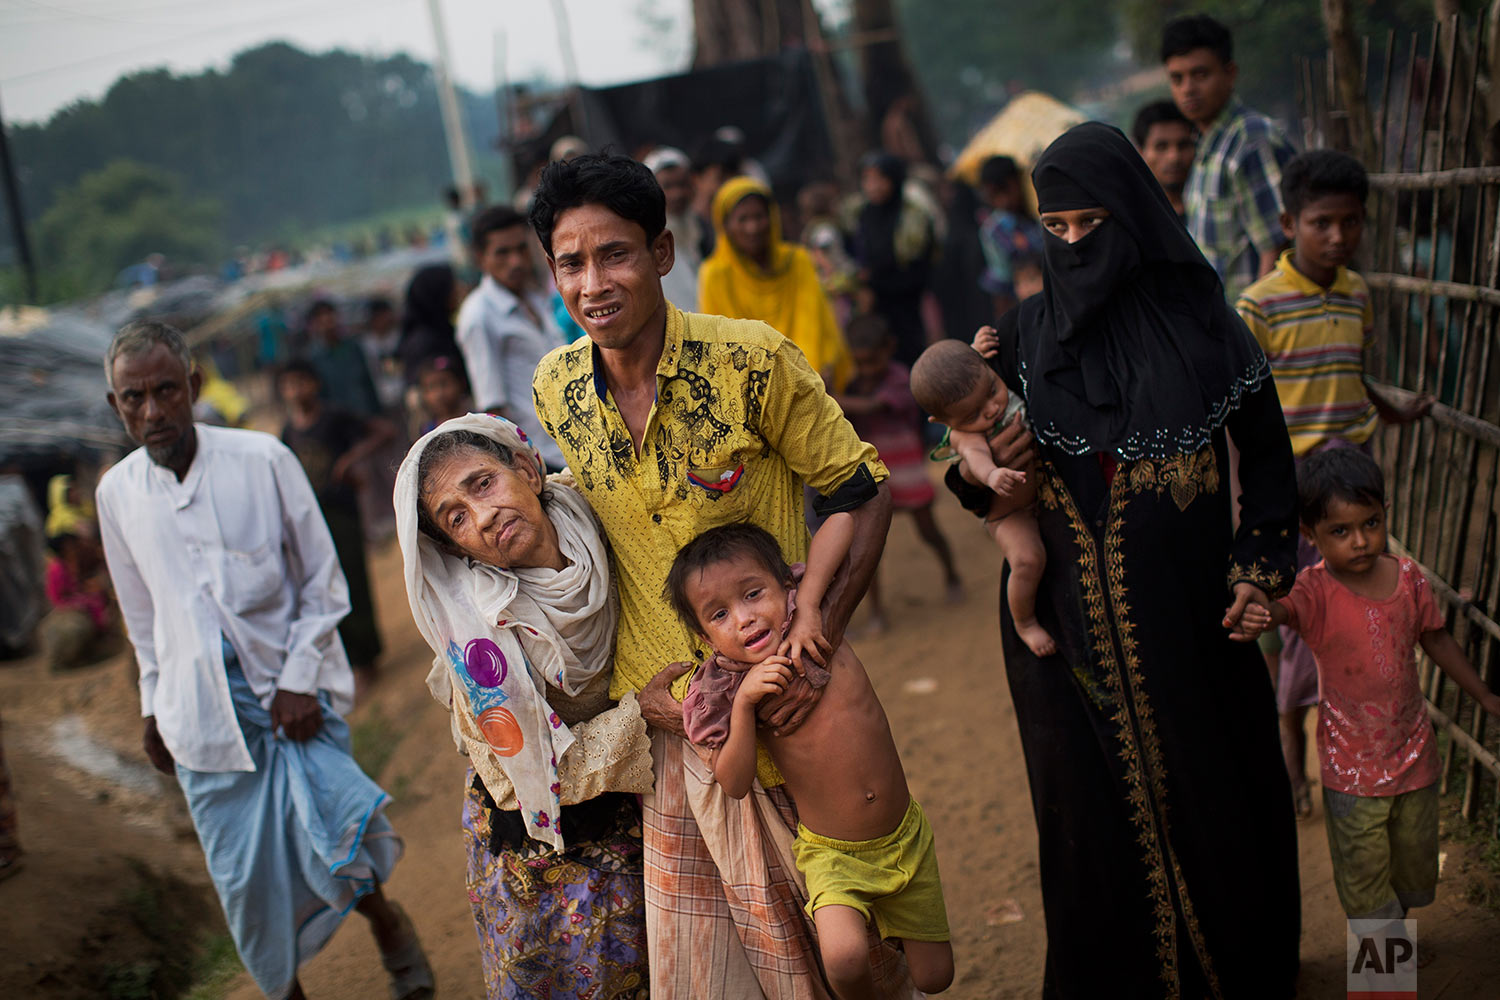 An exhausted Rohingya helps an elderly family member and a child as they arrive at Kutupalong refugee camp after crossing from Myanmmar to the Bangladesh side of the border, in Ukhia, Tuesday, Sept. 5, 2017. The man said he lost several family members in Myanmar. Tens of thousands of Rohingya Muslims, fleeing the latest round of violence to engulf their homes in Myanmar, have been walking for days or handing over their meager savings to Burmese and Bangladeshi smugglers to escape what they describe as certain death. (AP Photo/Bernat Armangue)